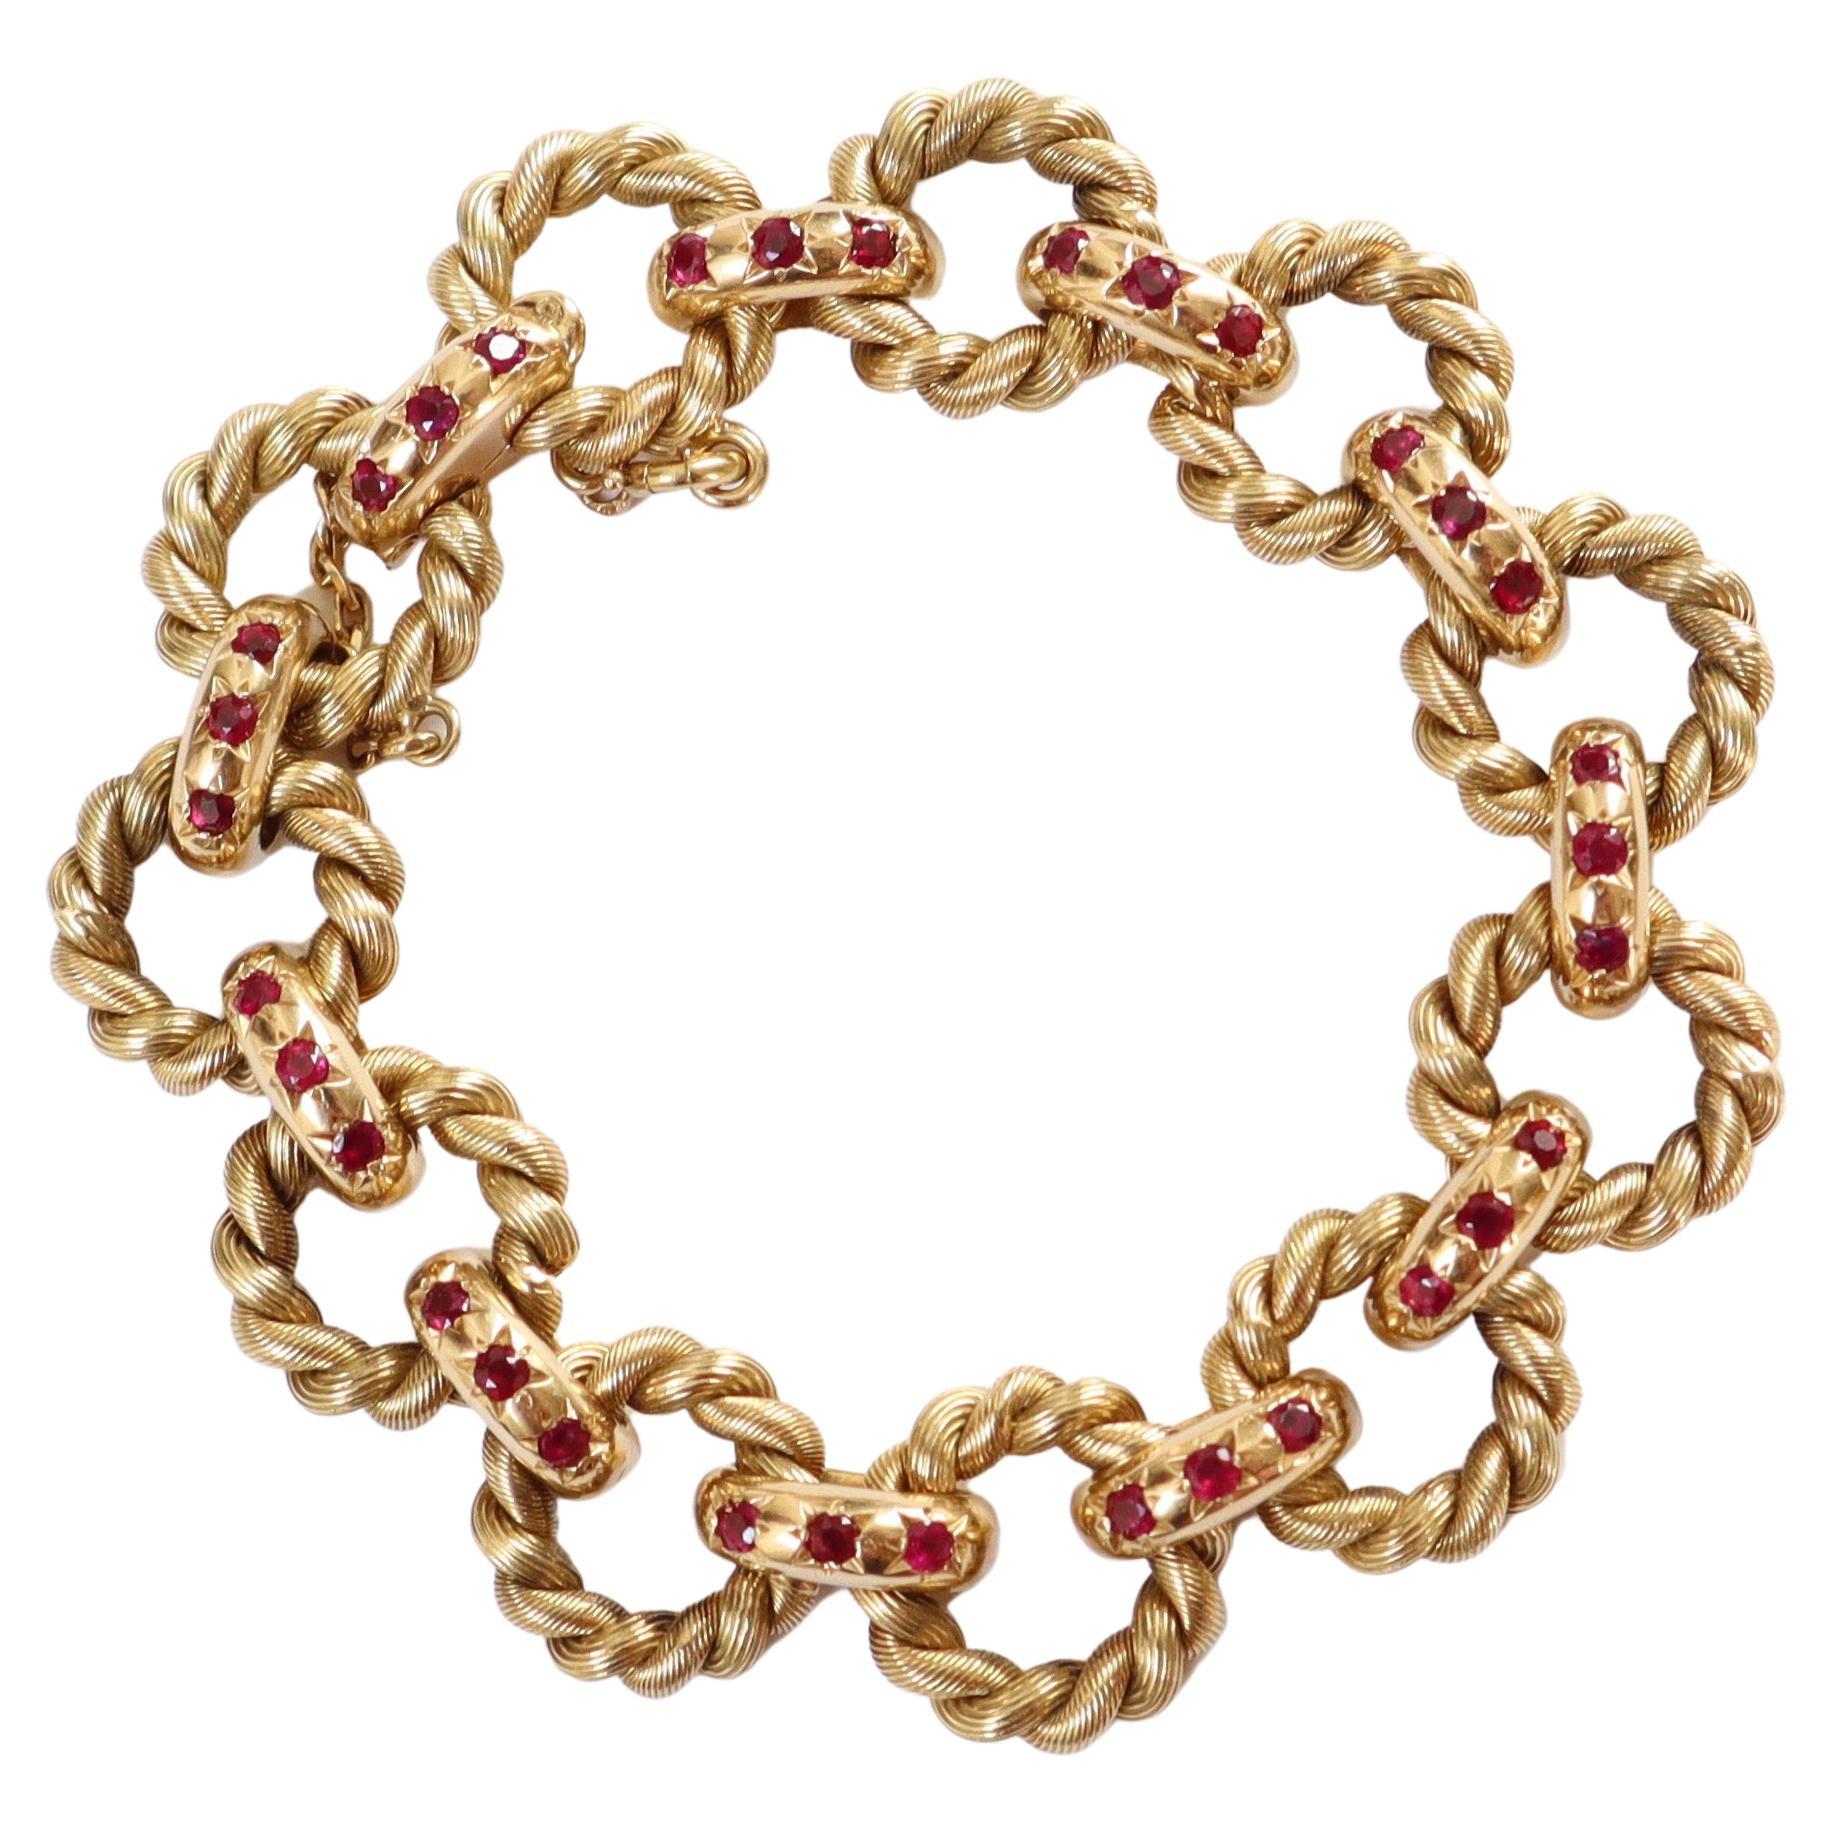 Van Cleef & Arpels Bracelet in 18K Yellow Gold and Rubies with Twisted Hoops